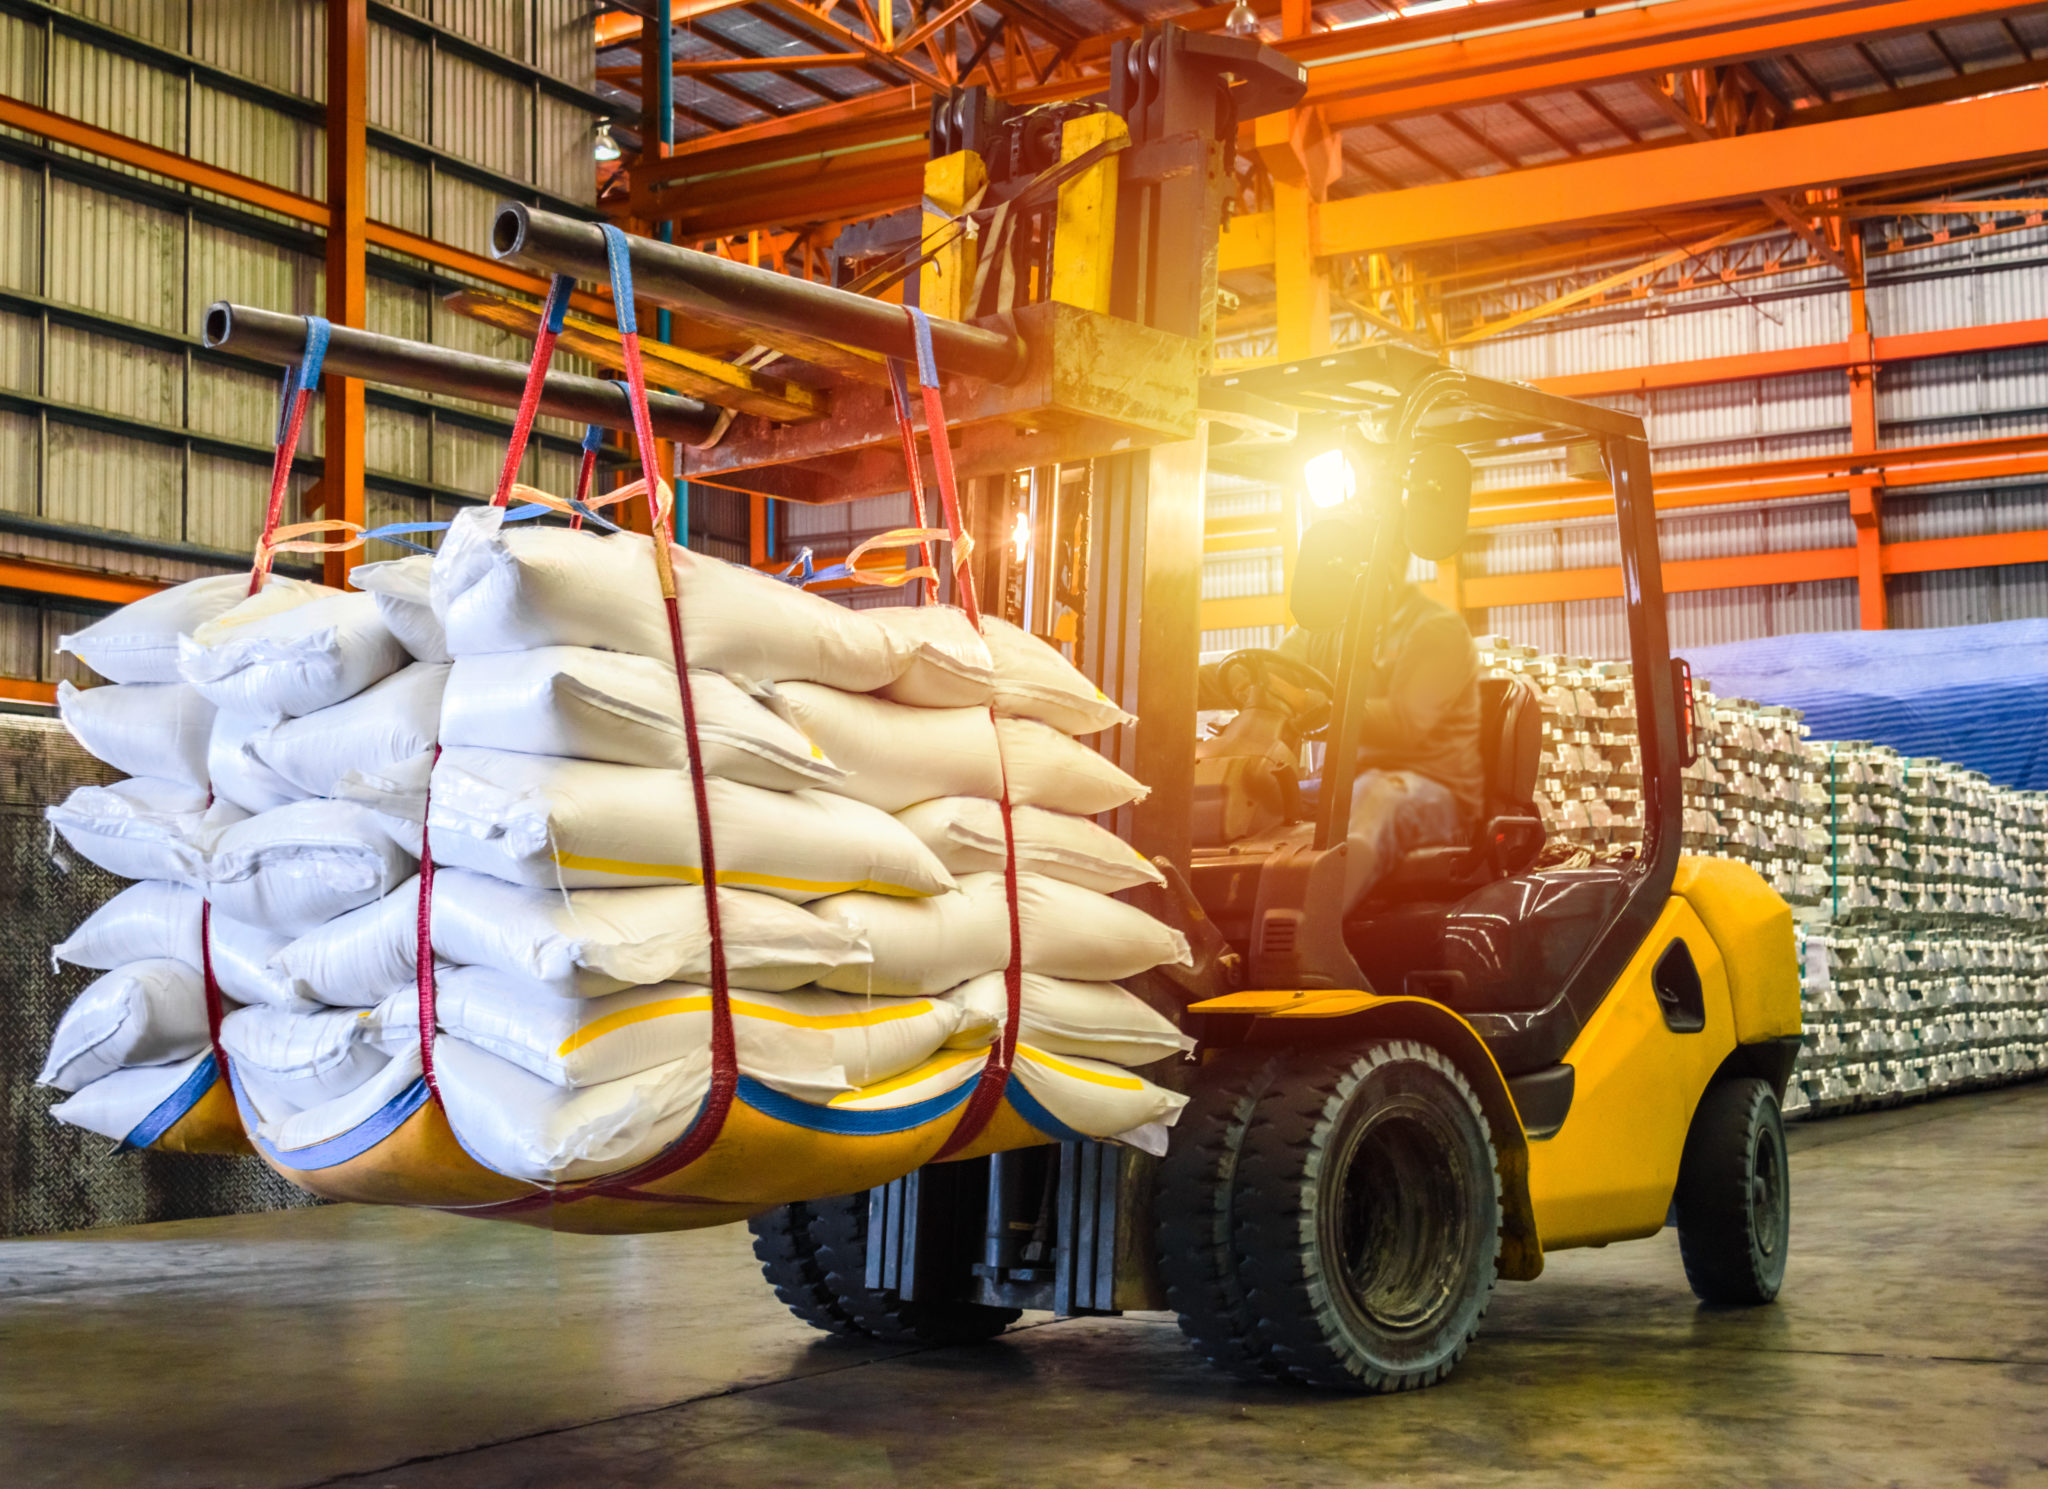 Forklift transporting agricultural products